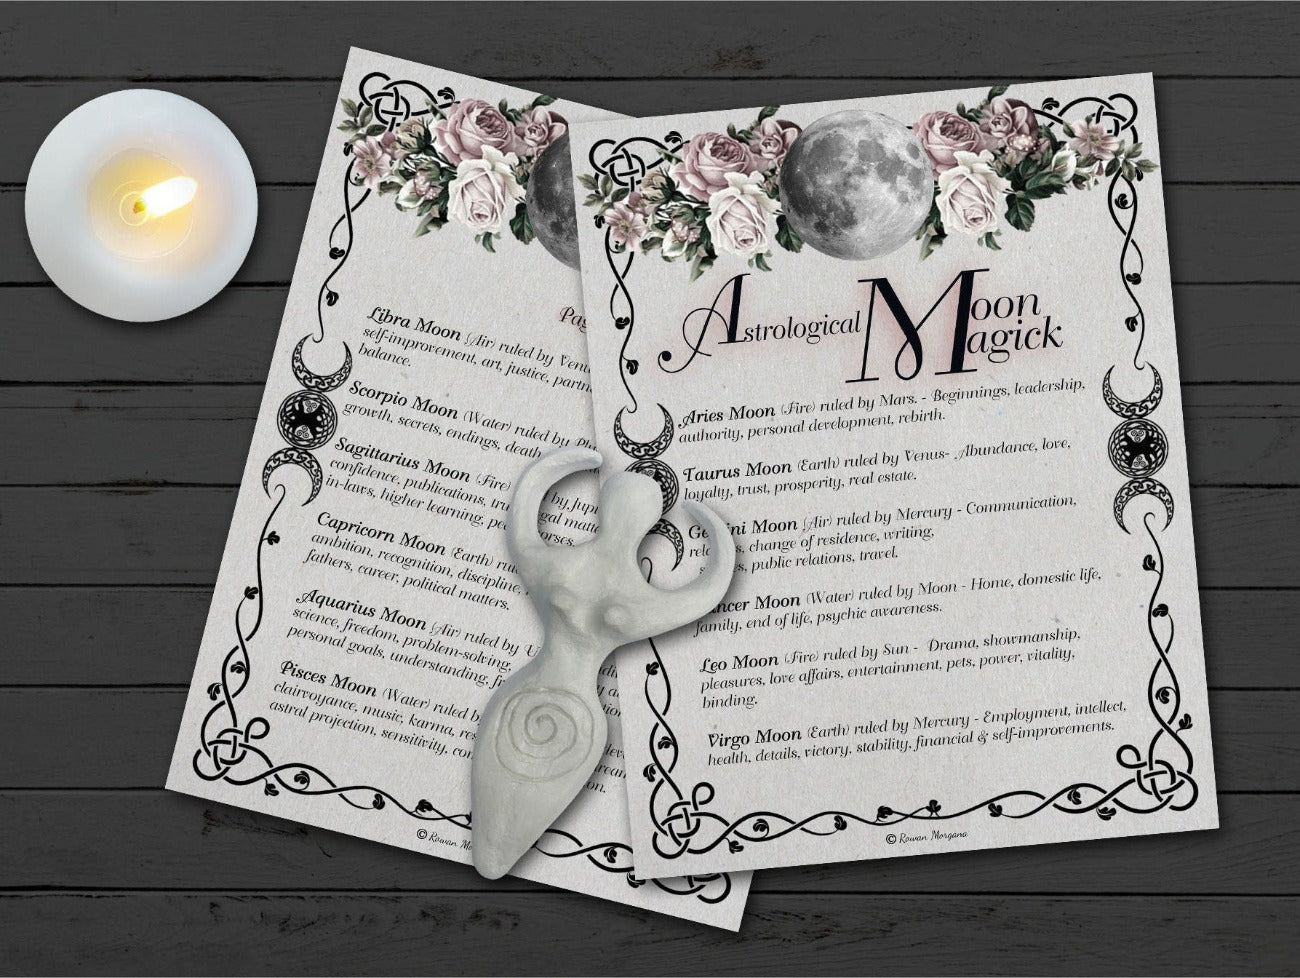 WICCAN MOON MAGIC 10 Pages, Correspondences, Full Moon Names, Moon Phases, Astrological Moon Spell Ritual, Wicca Witchcraft Esbat Altar - Morgana Magick Spell